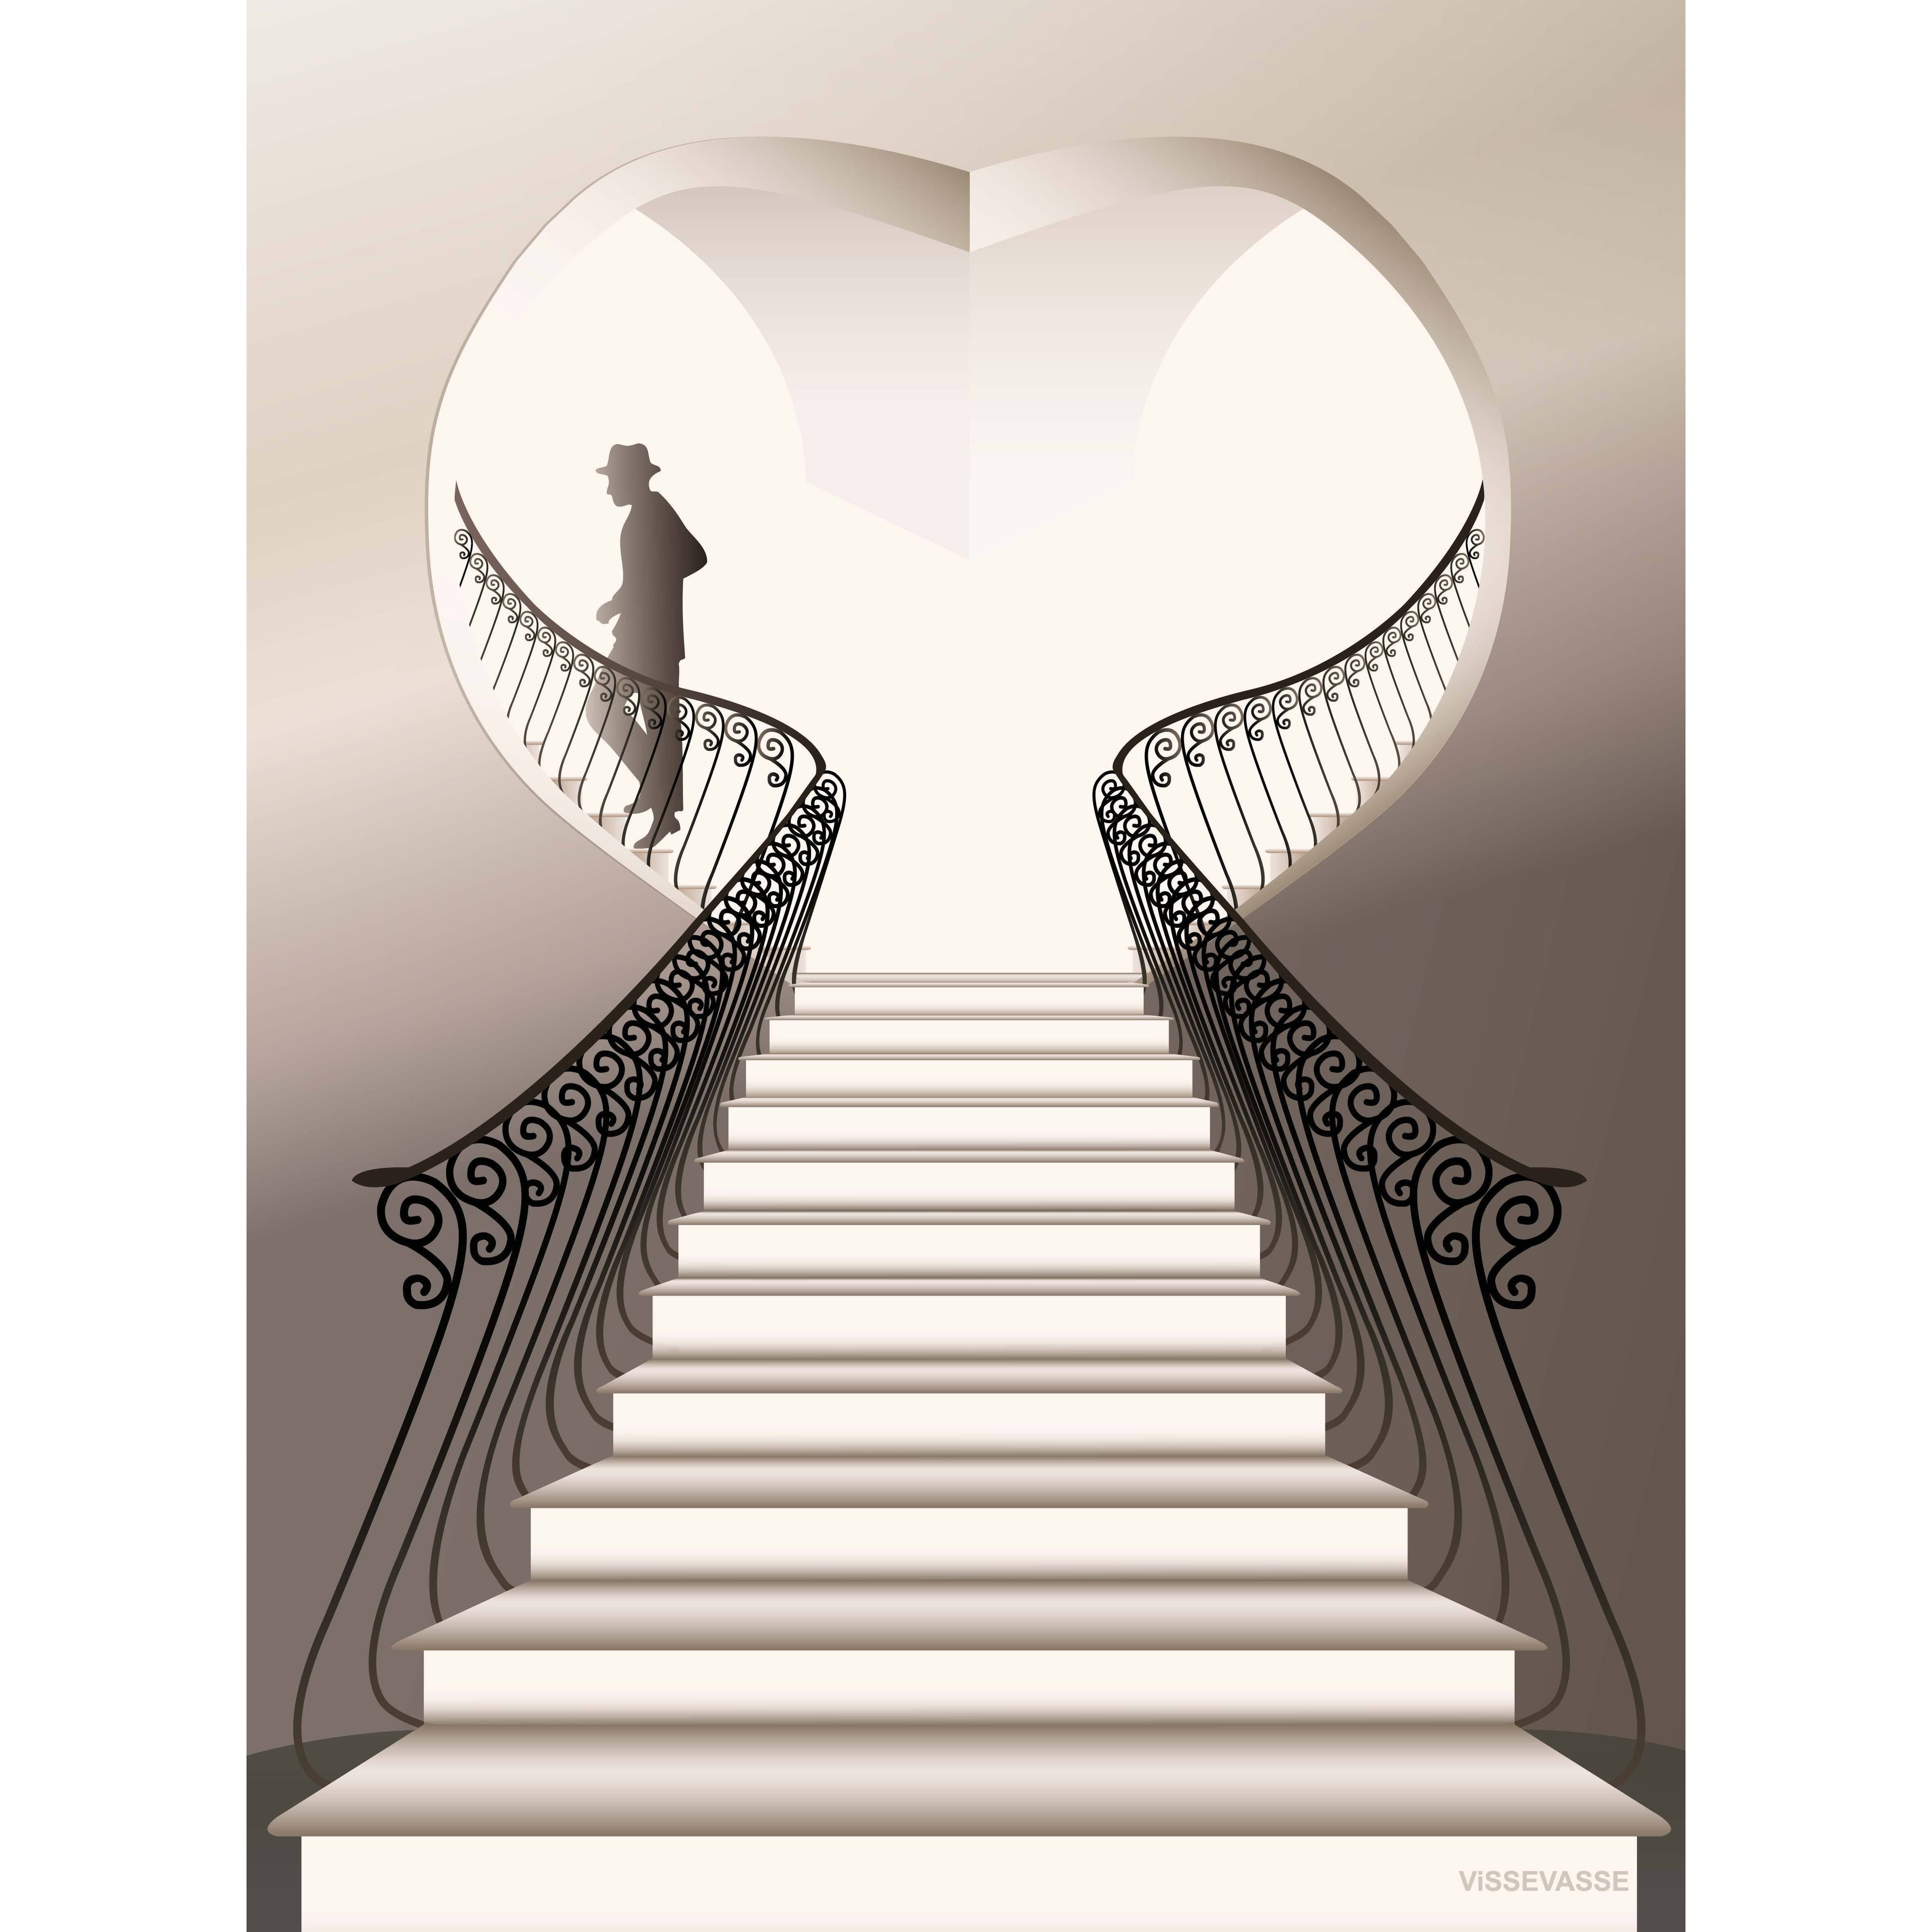 Vissevasse The Man On The Stairs Poster, 15 X21 Cm